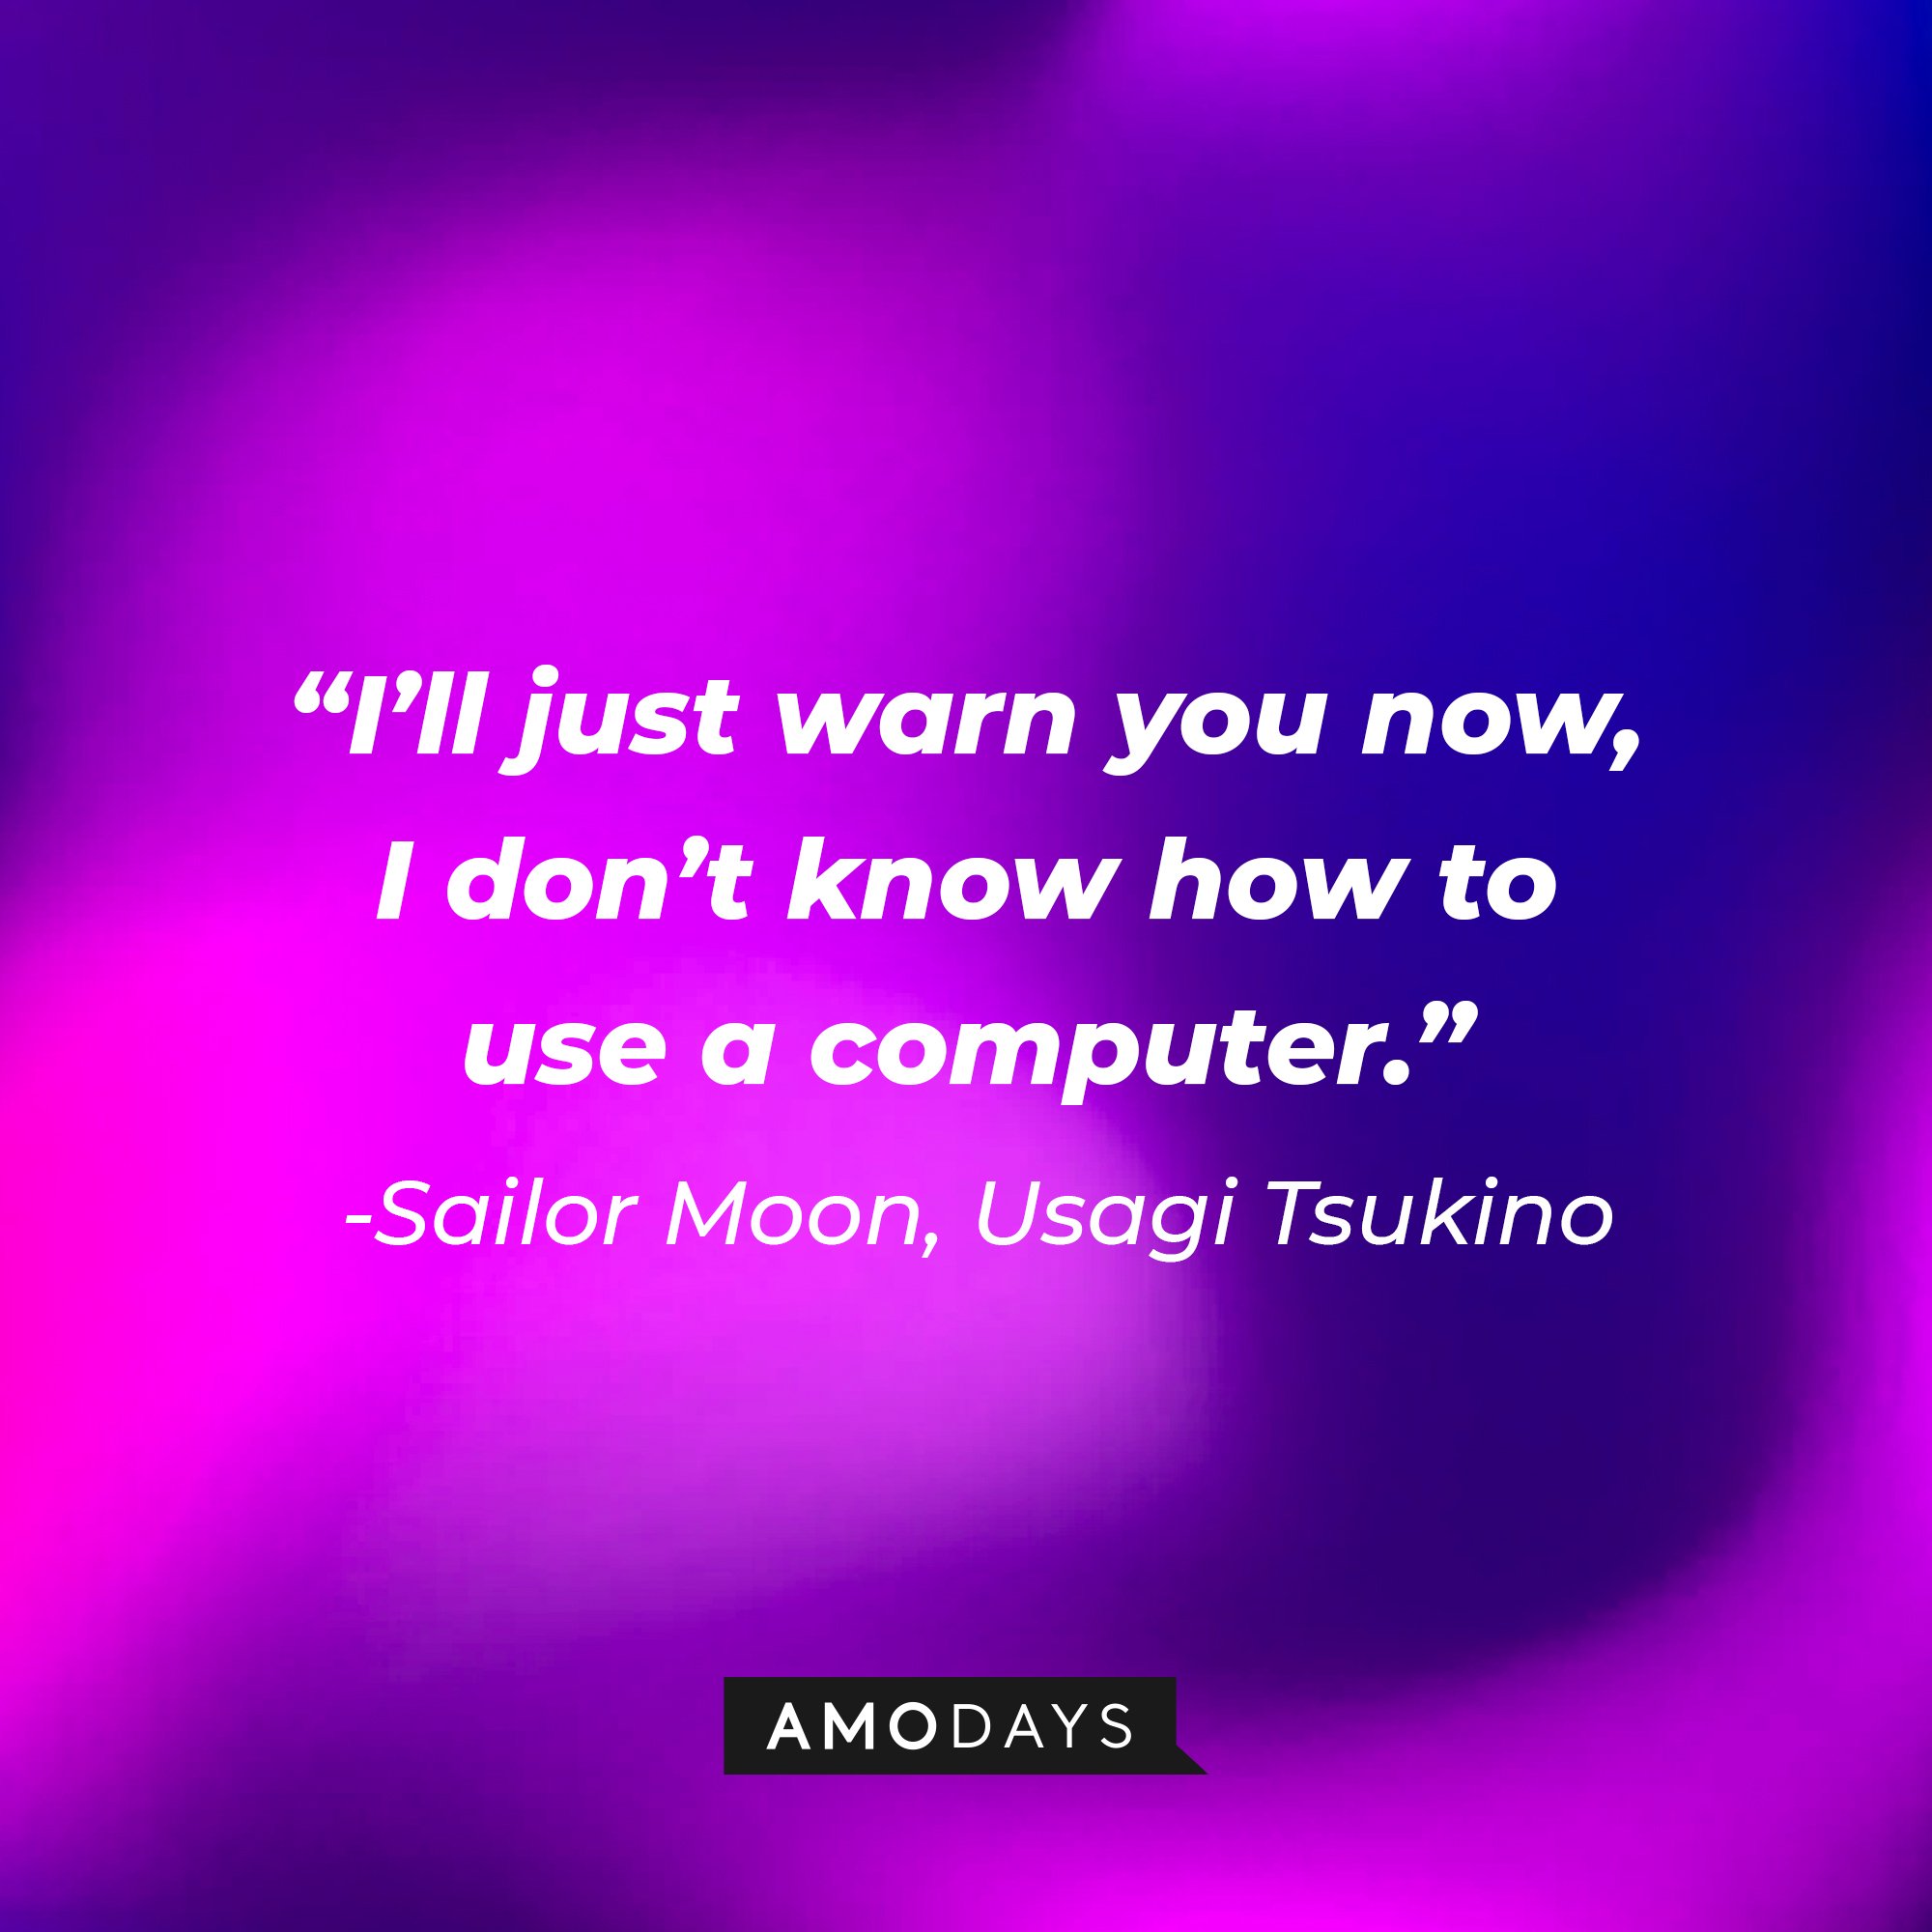 Sailor Moon/ Usagi Tsukino’s quote: "I’ll just warn you now, I don’t know how to use a computer." | Image: AmoDays